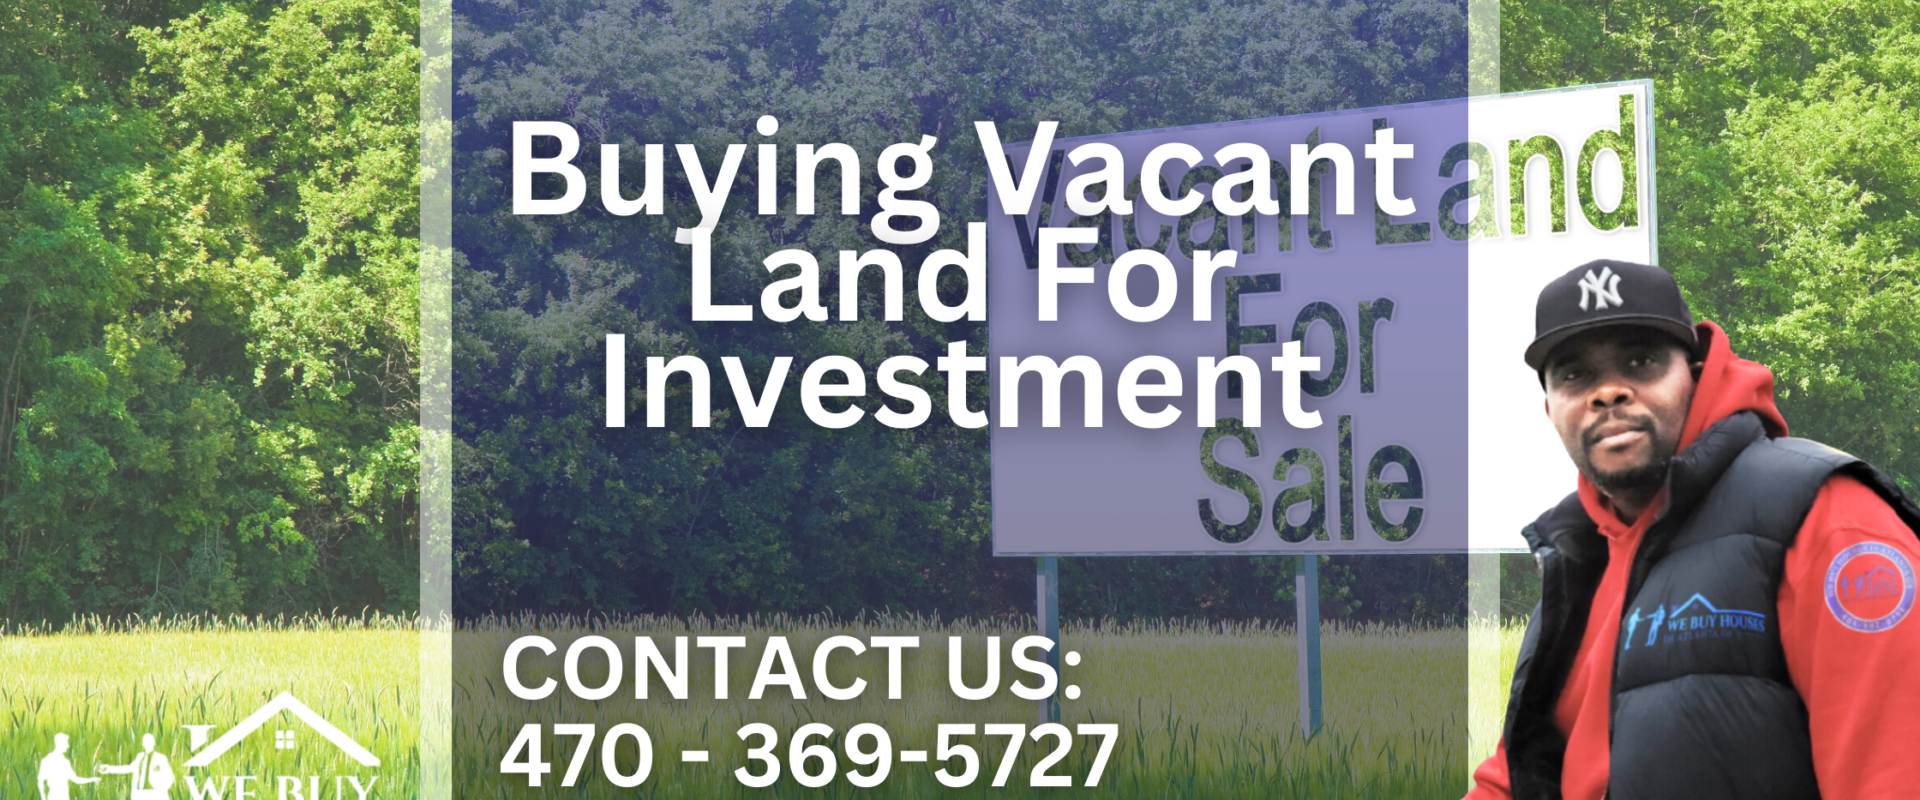 Buying Vacant Land For Investment